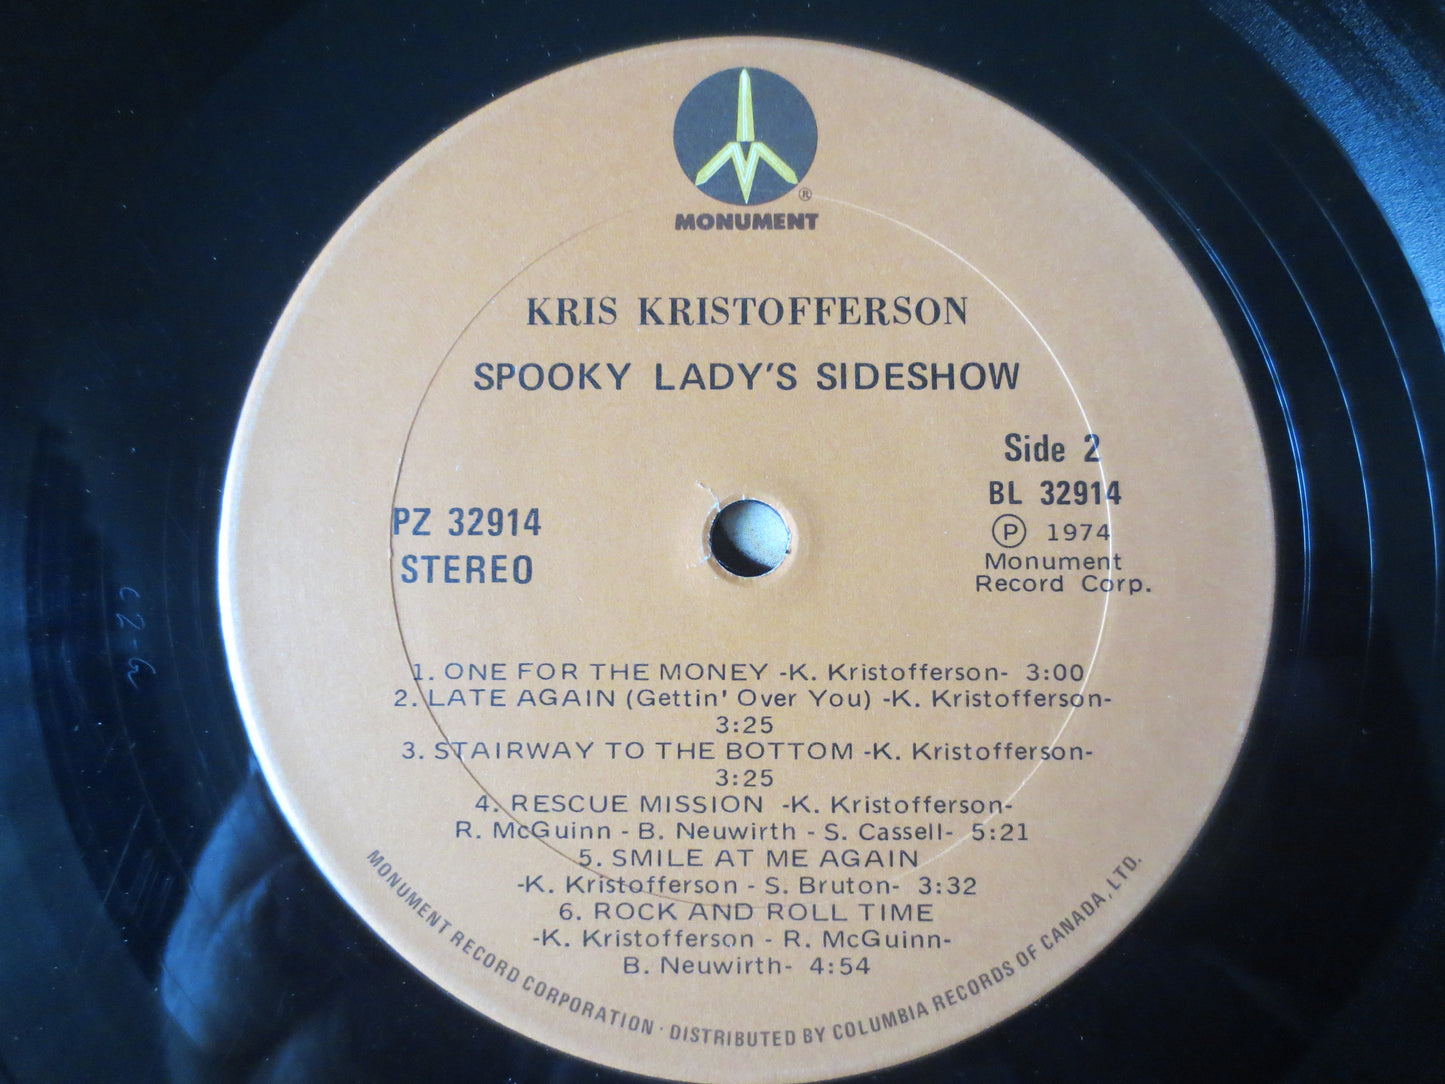 KRIS KRISTOFFERSON, SPOOKY Lady's Sideshow, Kristofferson, Vinyl Record, Vintage Vinyl, Record Vinyl, Records, 1974 Records